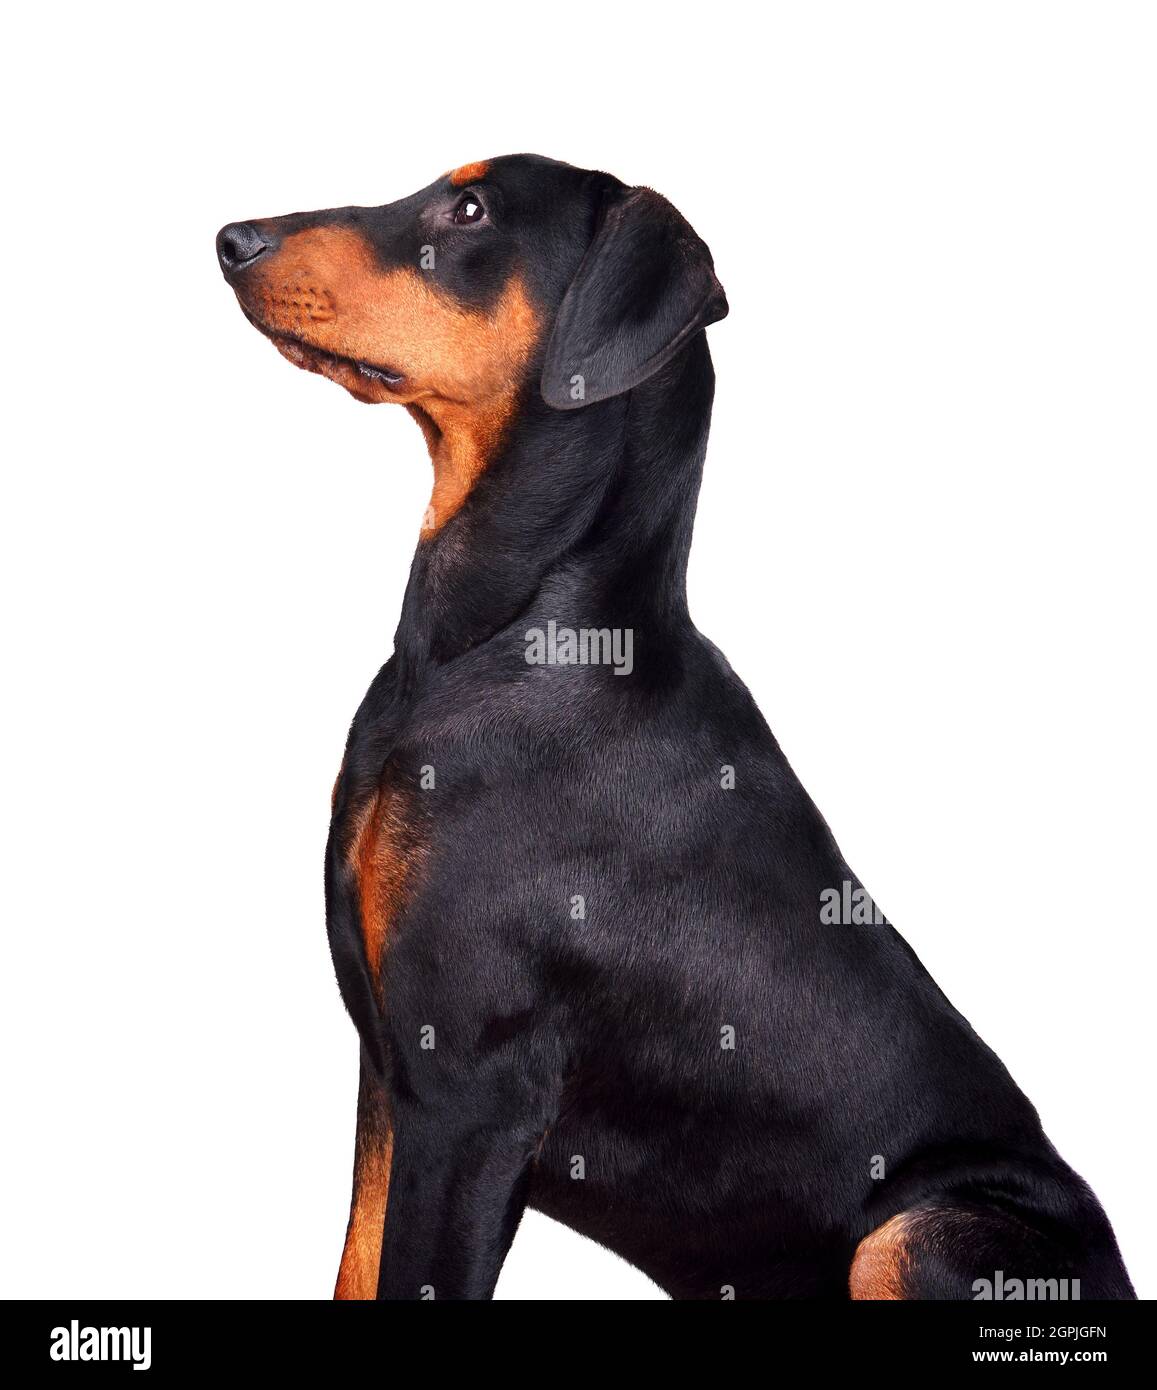 Six months old puppy of tan-and-black German Pinscher or Doberman Pinscher sitting on a white backgraund Stock Photo